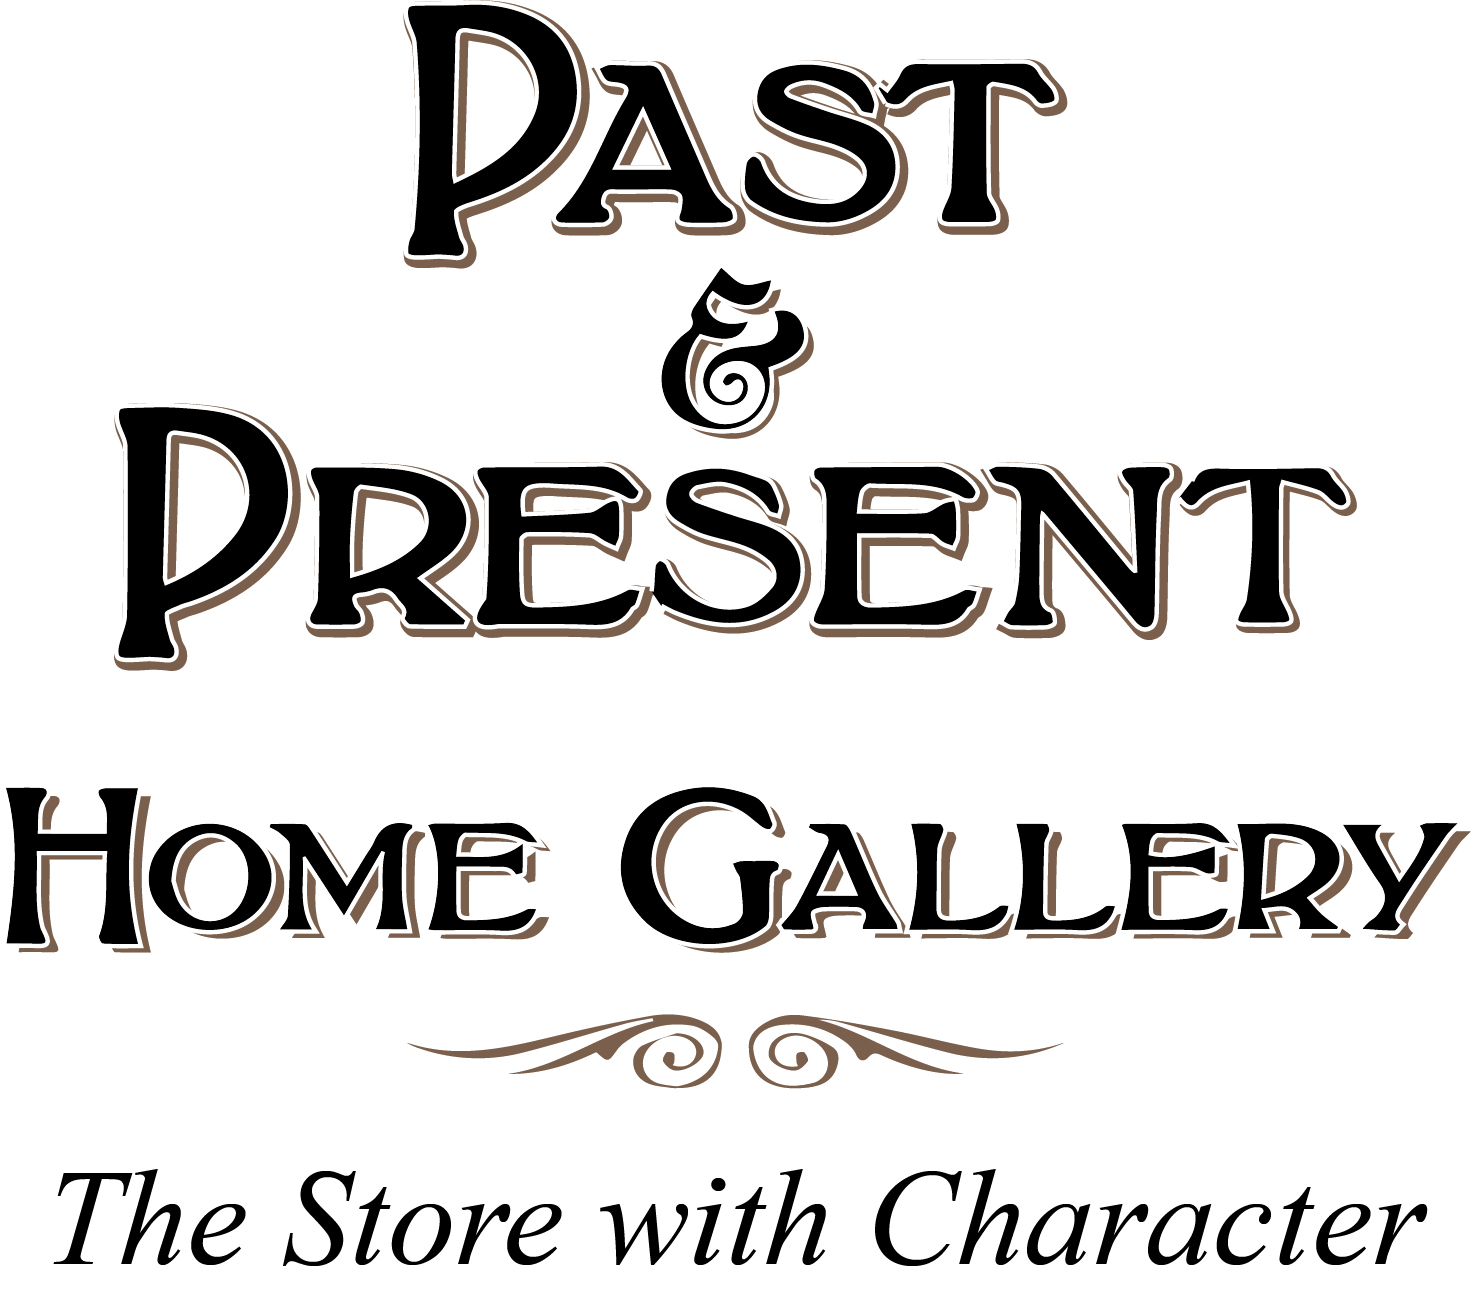 Past & Present Home Gallery Recognized With Customer Experience Award